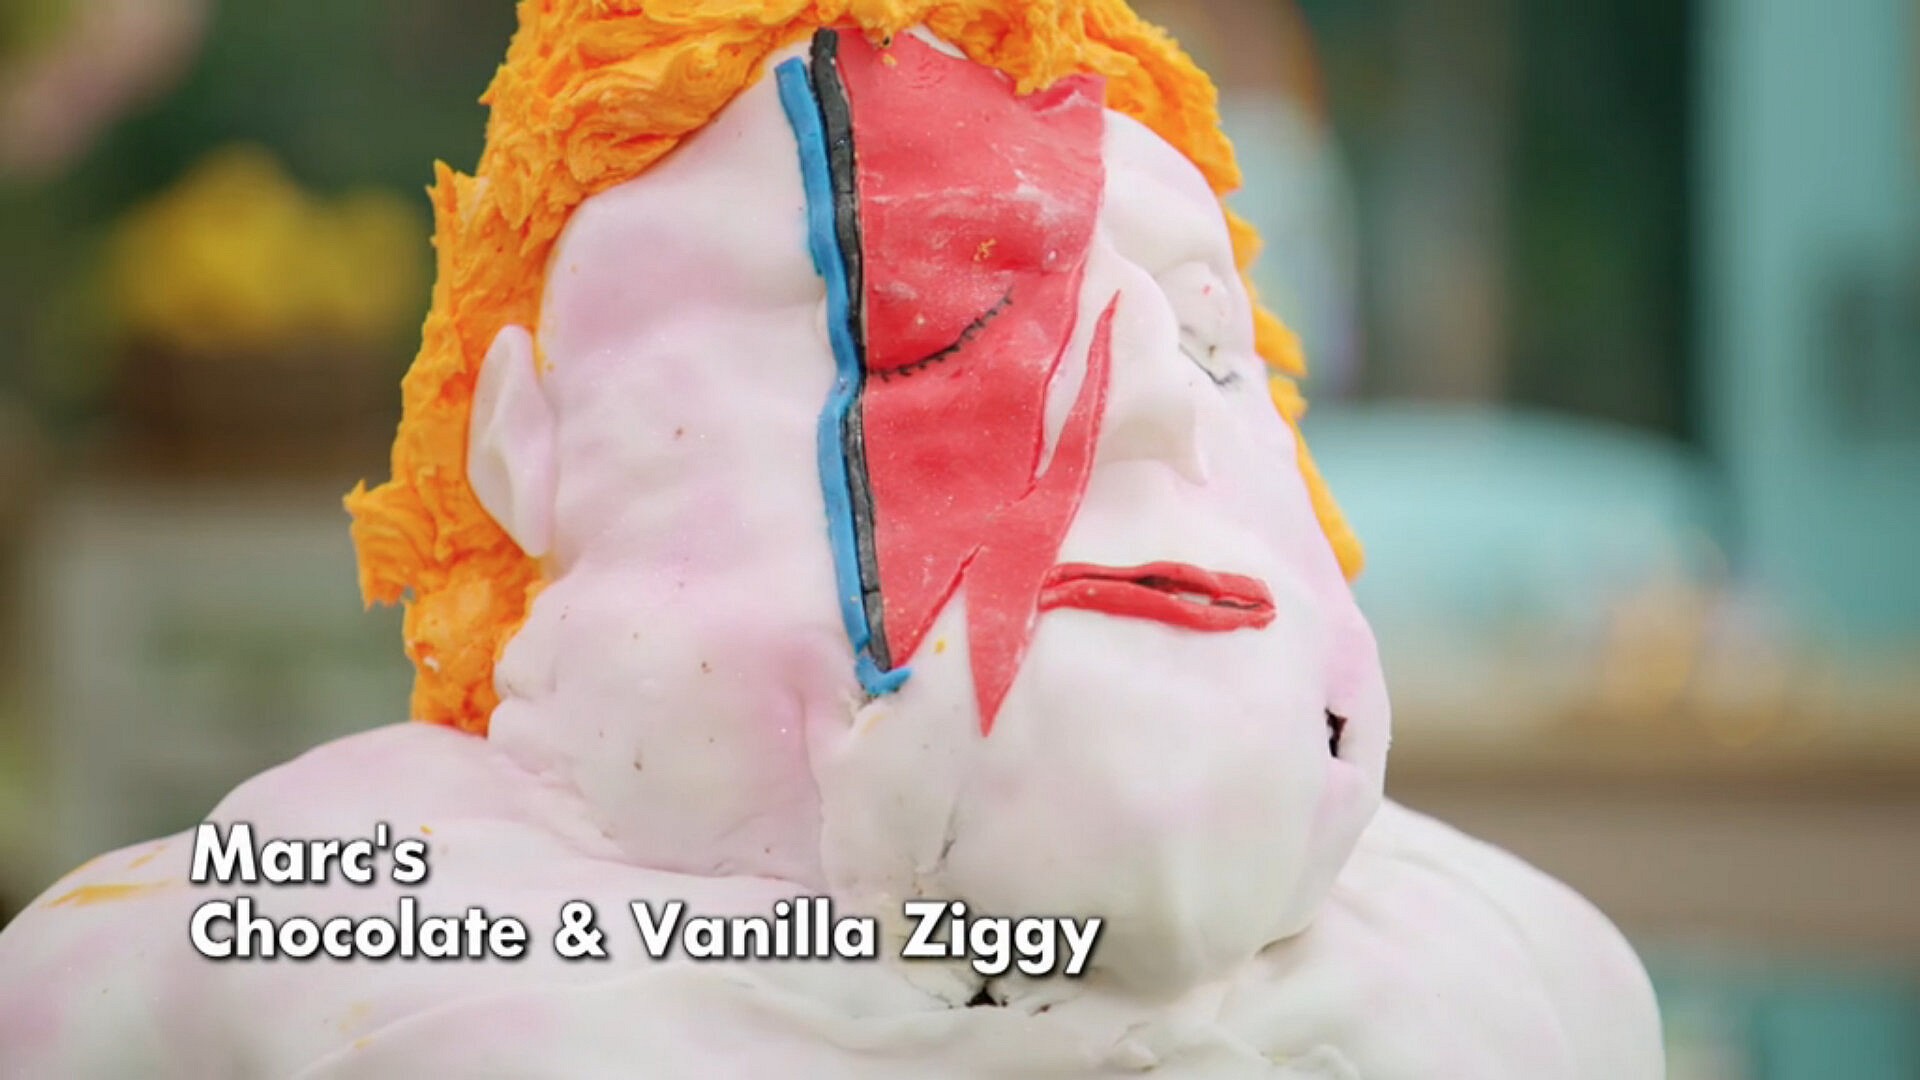 Marc's Ziggy Stardust bust cake.  © The Great British Bake Off/Channel 4